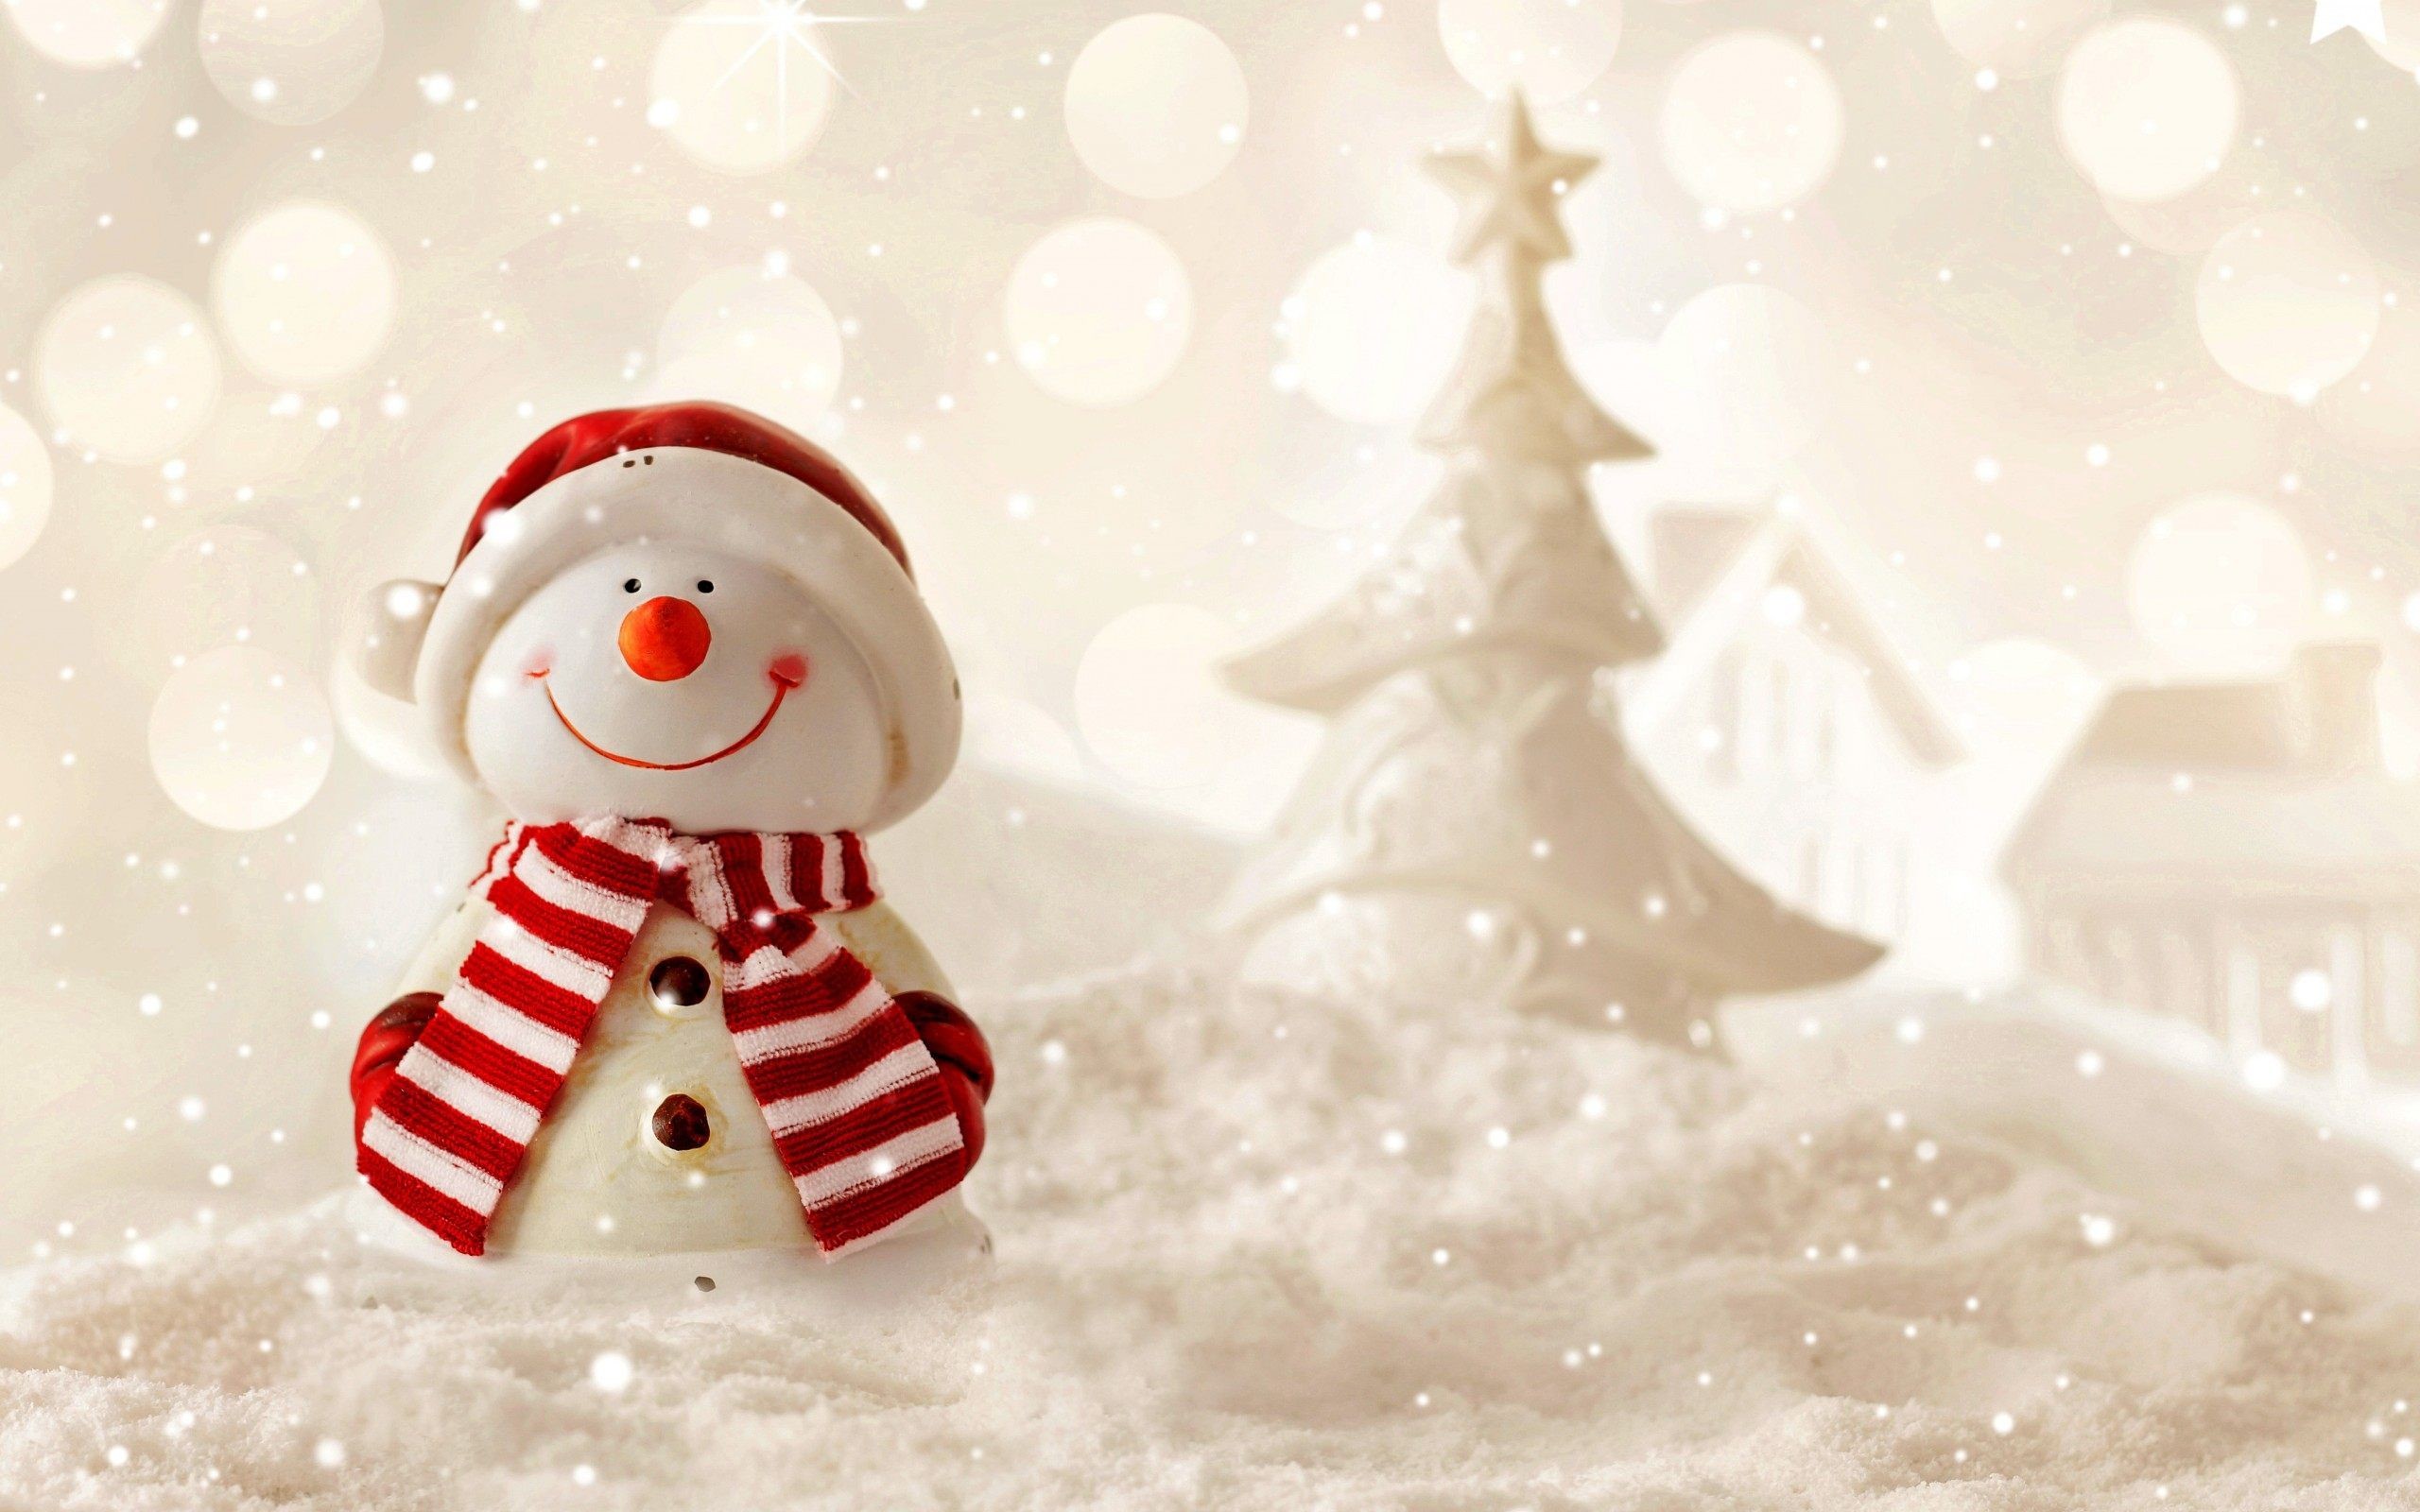 2560x1600 Snowman Wallpaper for desktop, laptop & mobile in high resolution download.  We have best collection of Cute Snowman Wallpaper hd and widescreen  resolutions